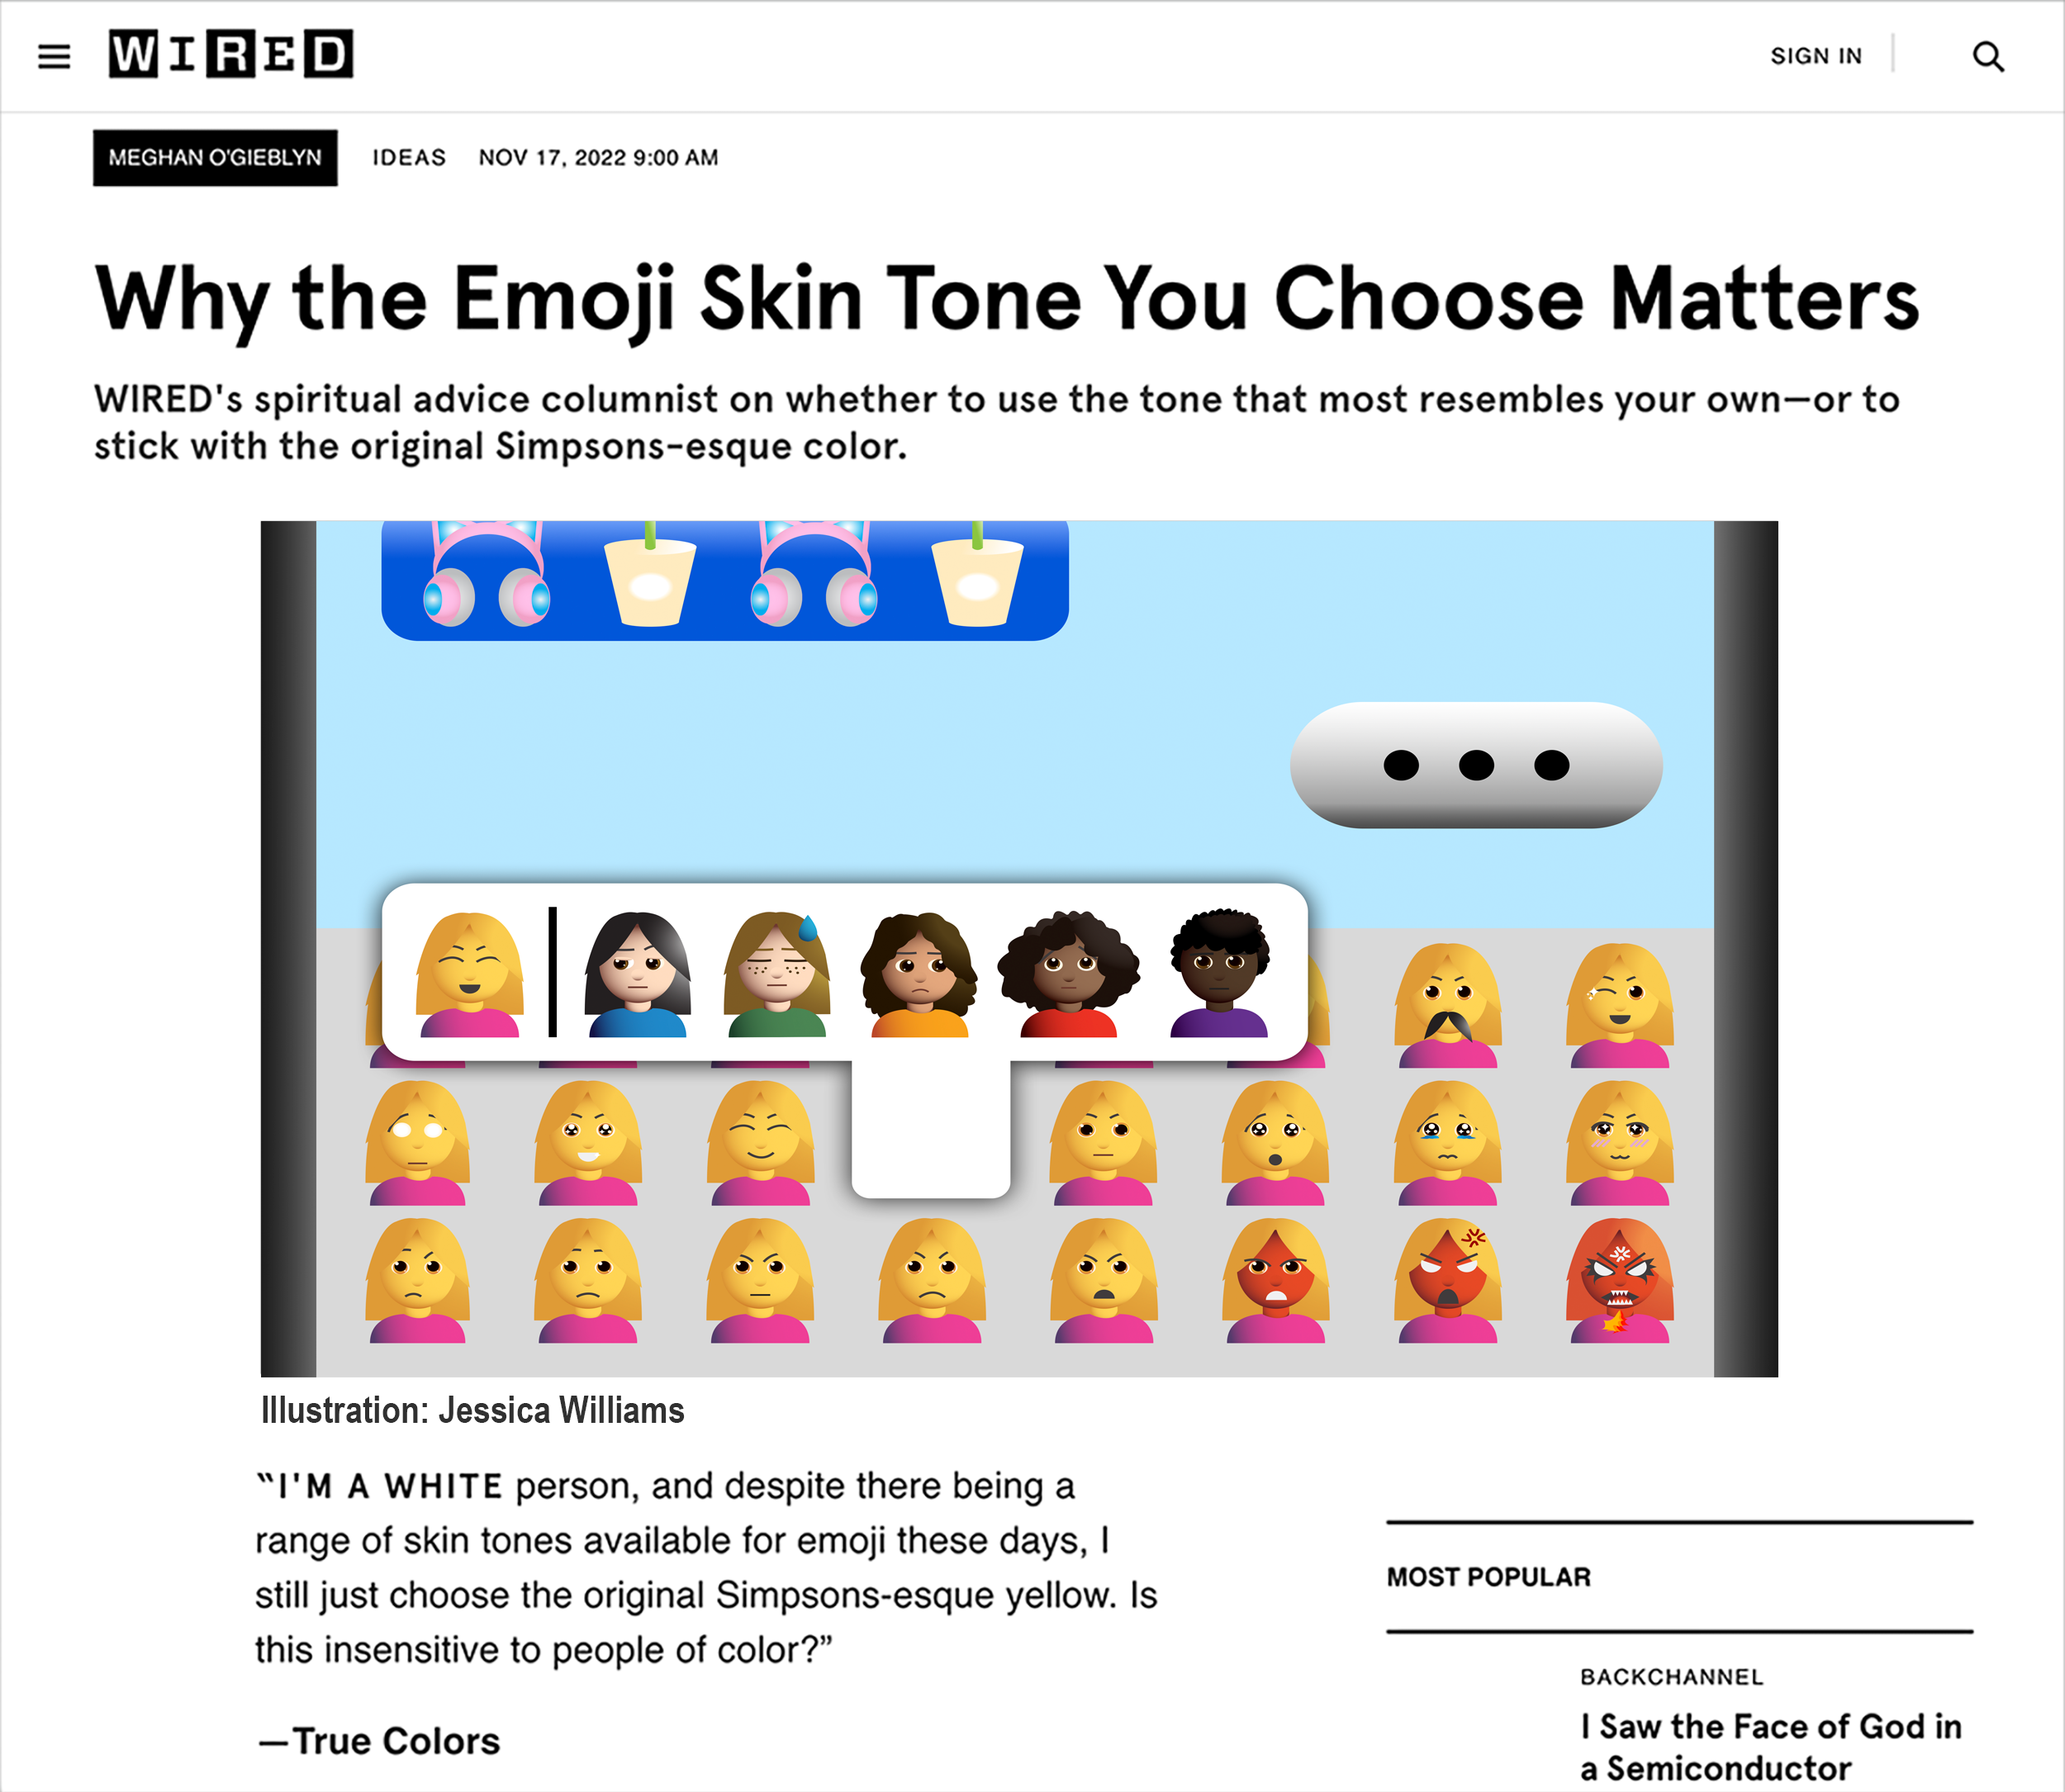 A digital Editorial Illustration of the Emoji Keyboard on a phone for the magazine WIRED. The article discusses whether using the yellow emoji skin tone is insensitive to people of color, as it usually refers to someone white. Hence, the illustrated keyboard features mainly yellow female emojis, while diverse human emojis are contained within a small option box.